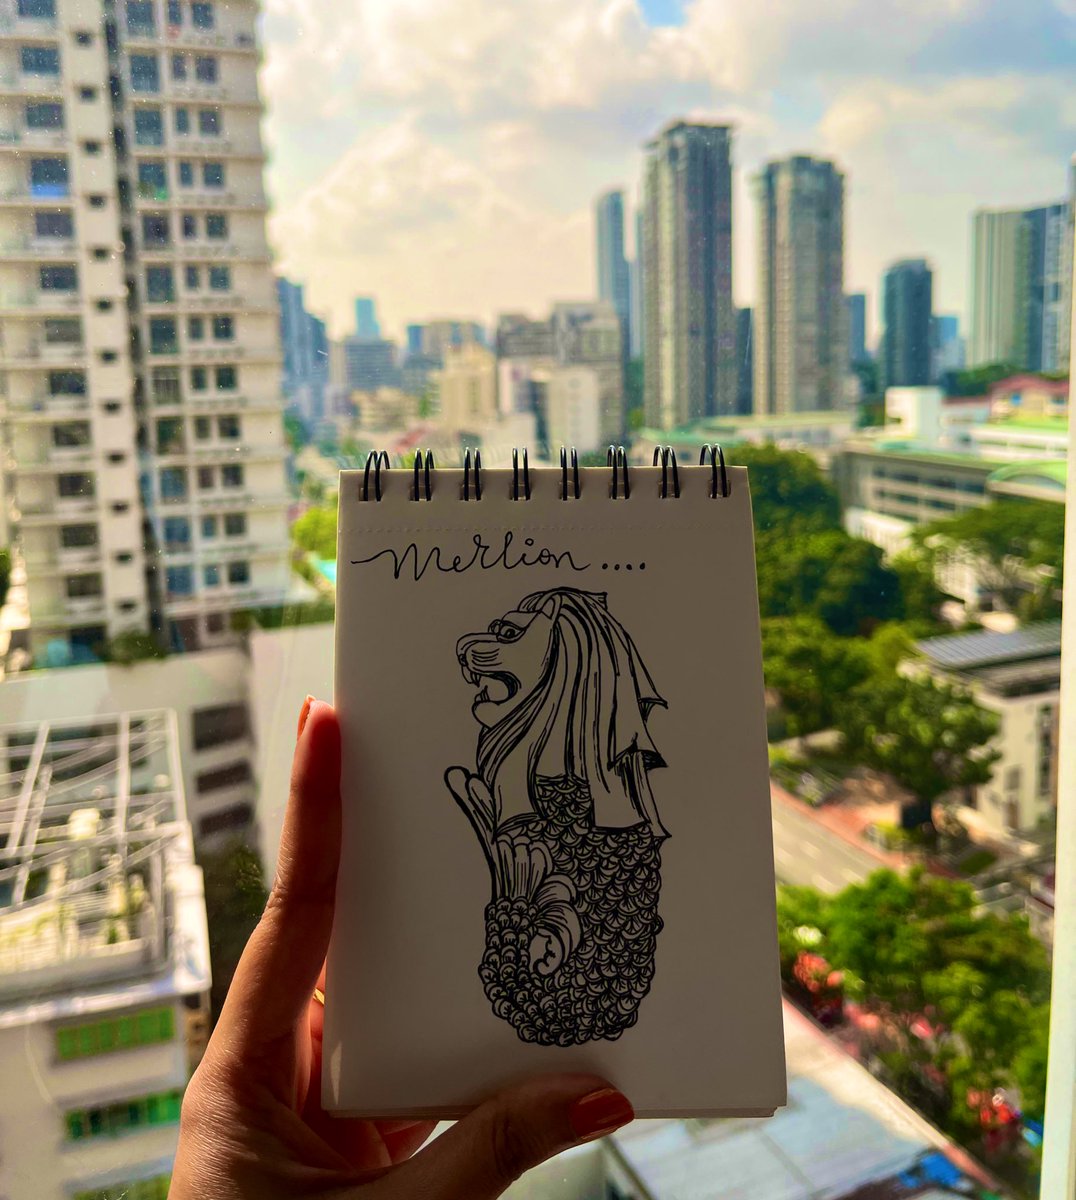 The lion city ✨ #Singapore #merlion #create2learn #ArtistOnTwitter